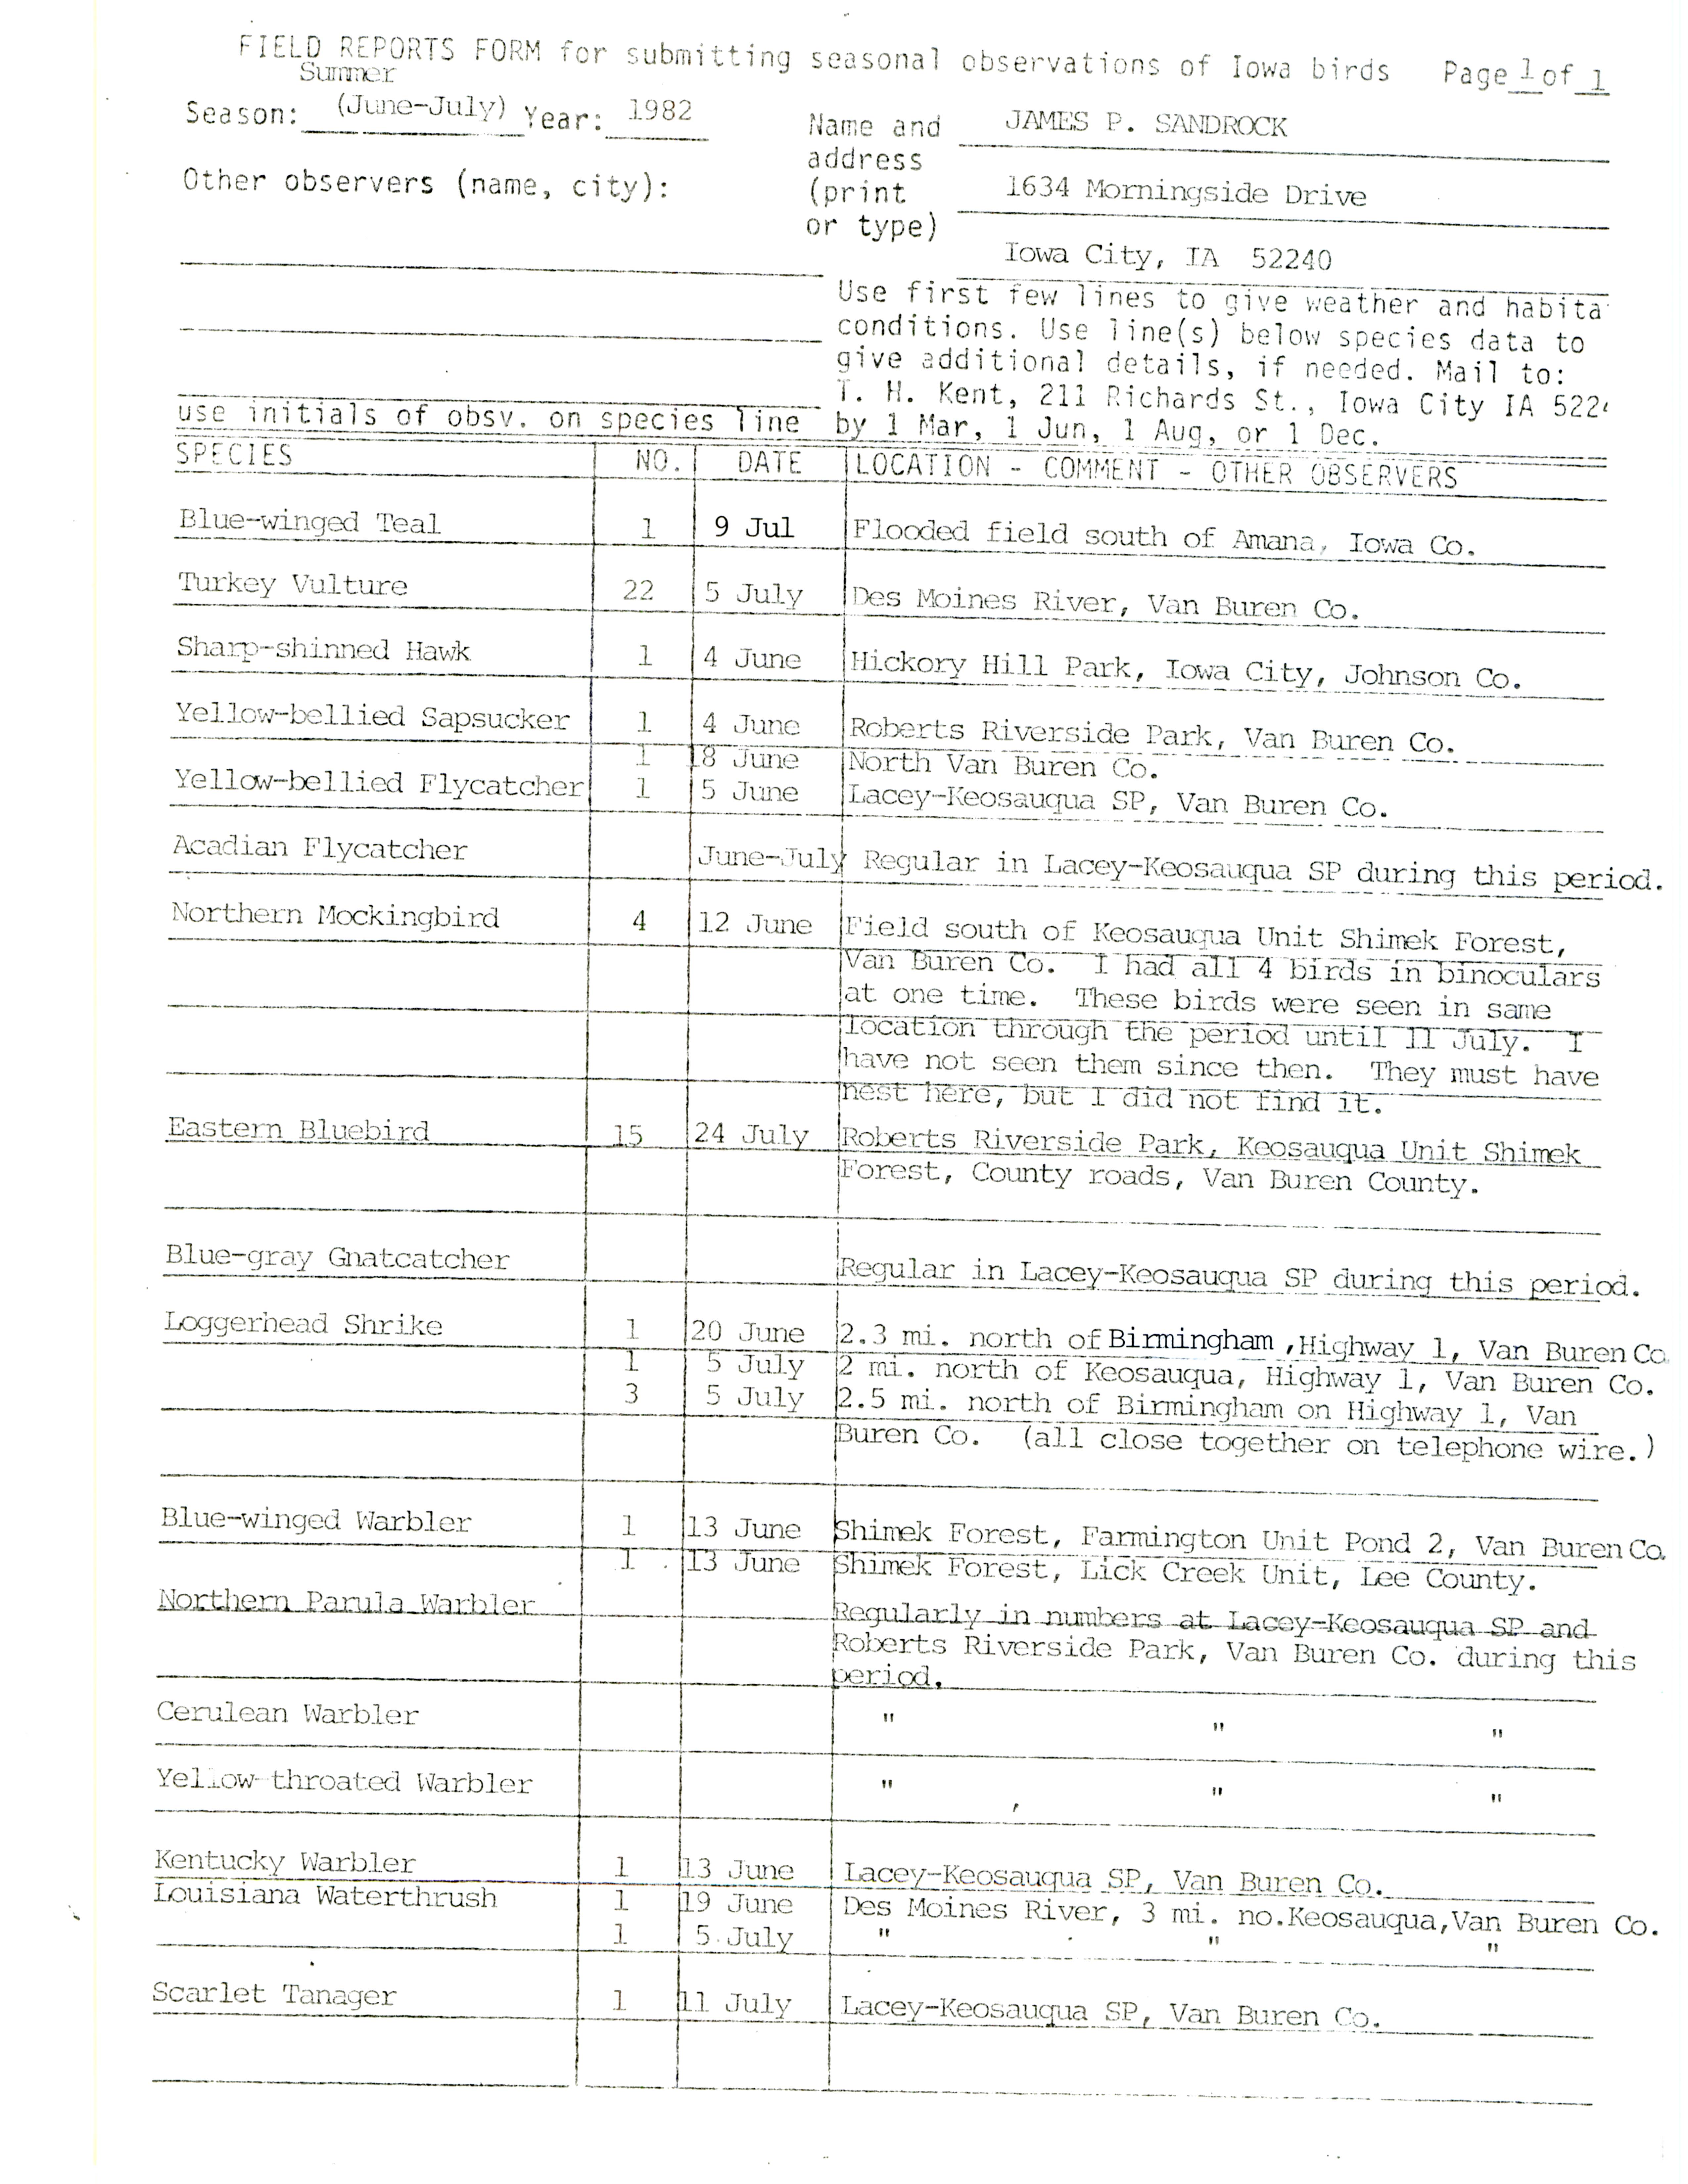 Field report submitted by James P. Sandrock, June-July 1982